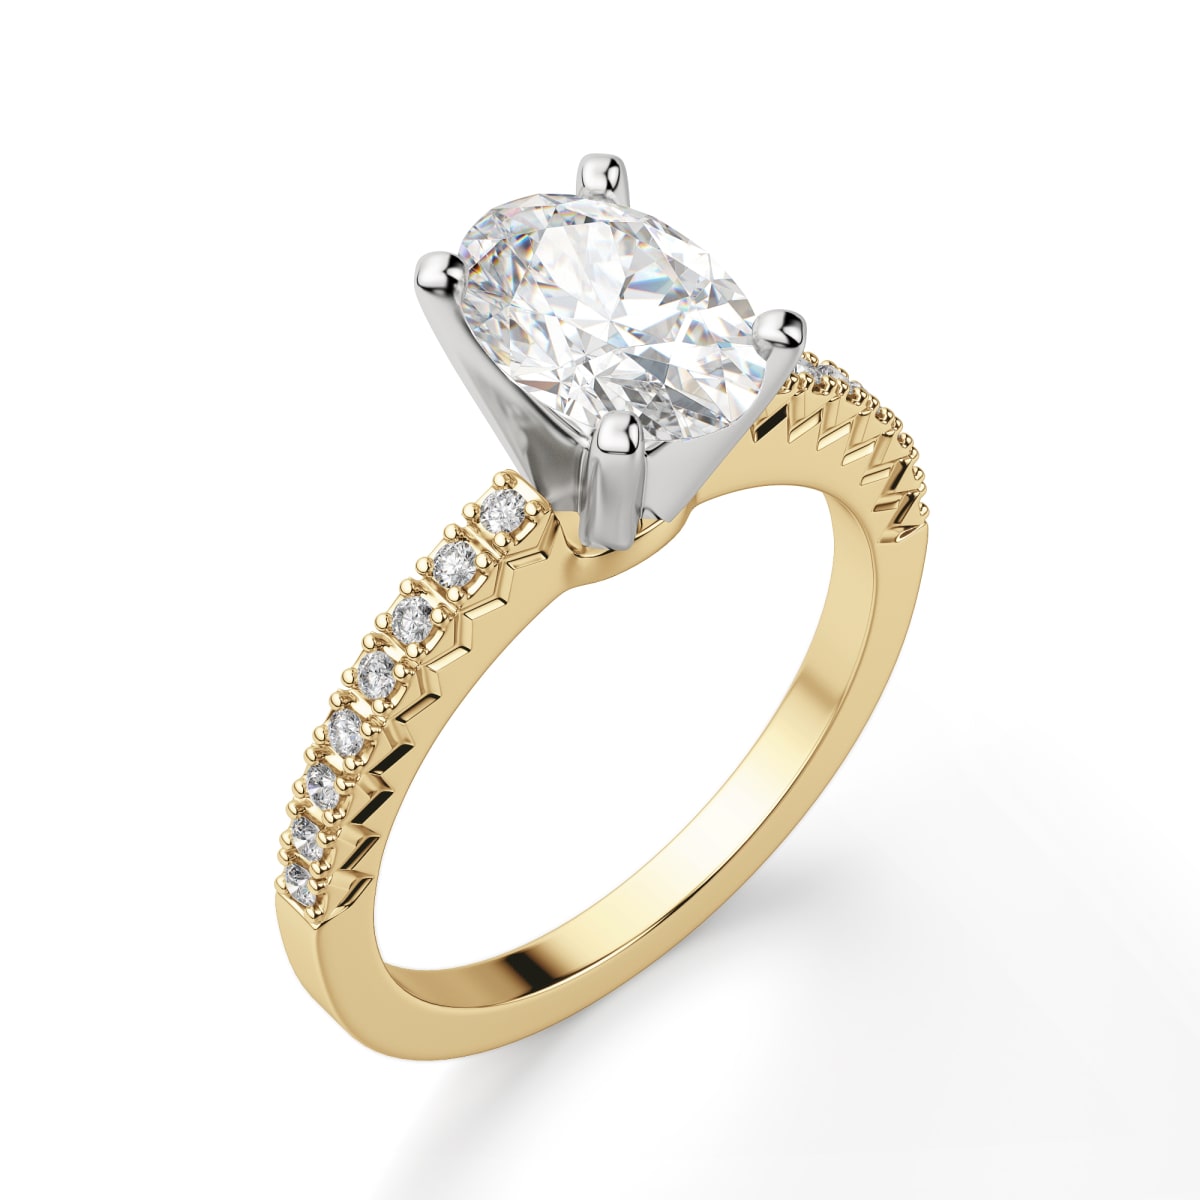 Angelix Engagement Ring With 1.25 ct Oval Center DEW, Ring Size 5.75, 14K Yellow Gold, Nexus Diamond Alternative